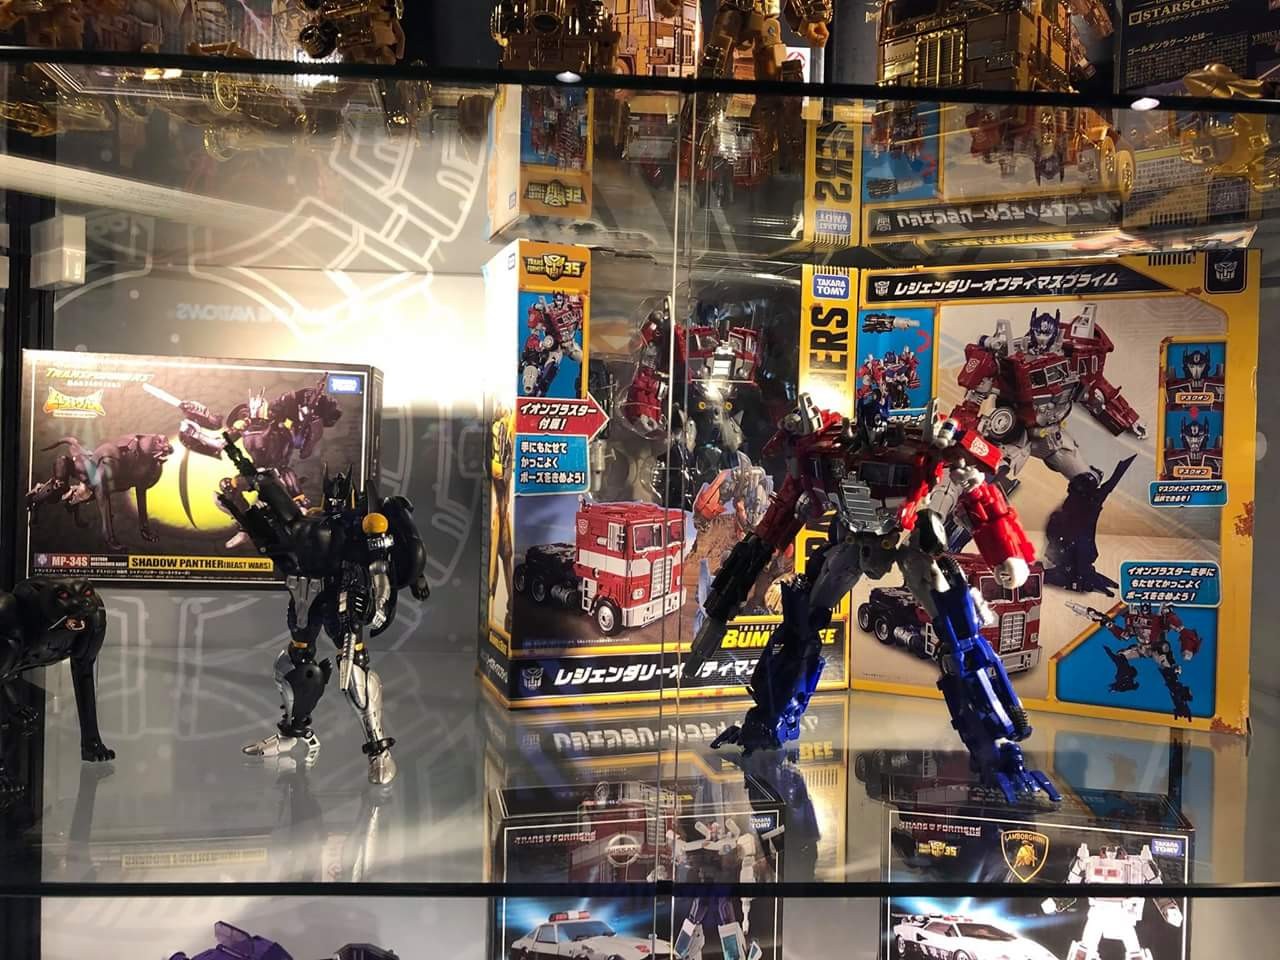 Transformers News: Bumblebee: The Movie Toys on Display at Wonderfest with New Legendary Optimus Prime #ワンフェス #wf201